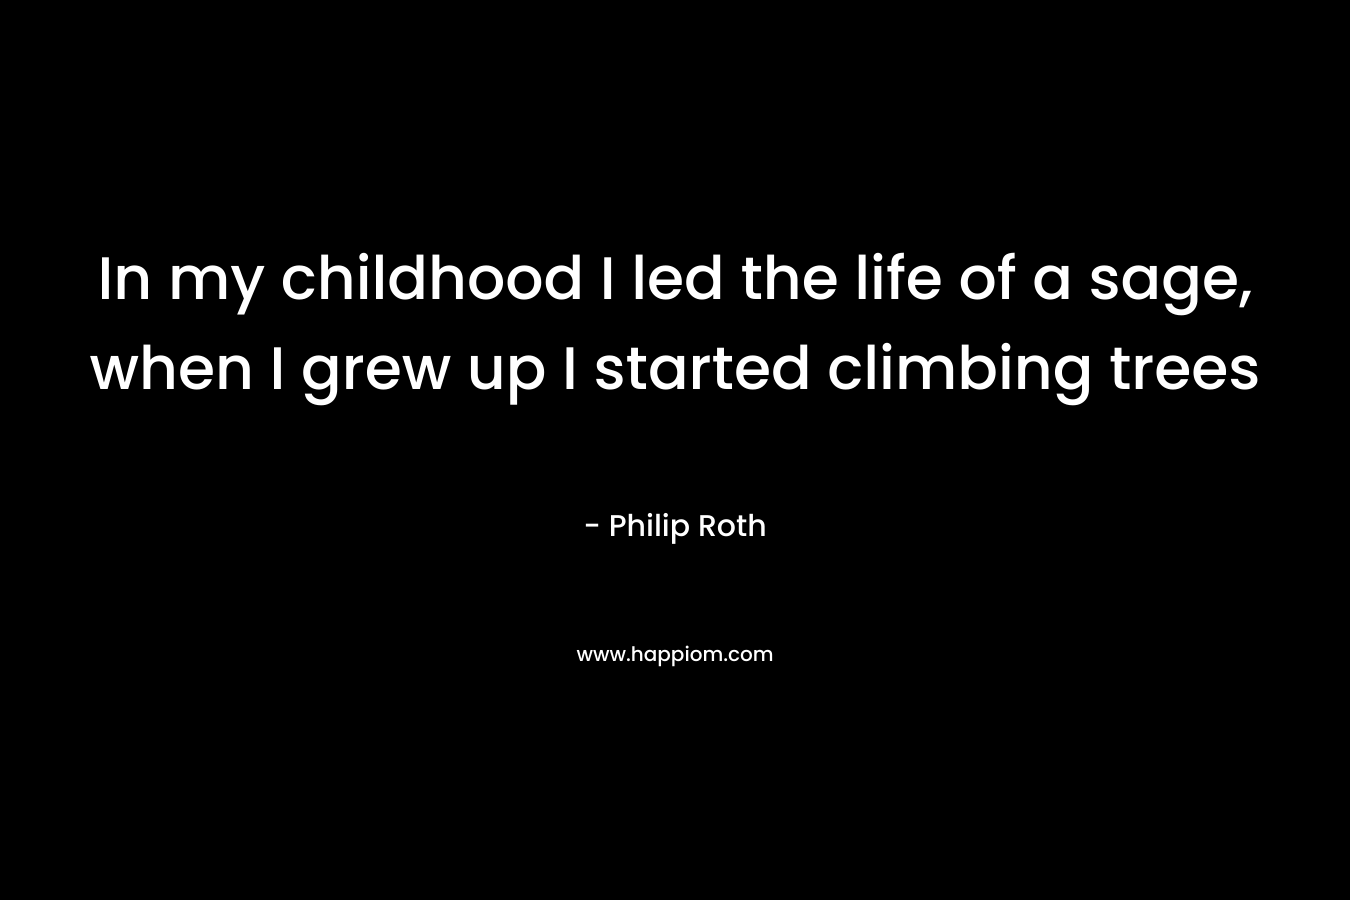 In my childhood I led the life of a sage, when I grew up I started climbing trees – Philip Roth